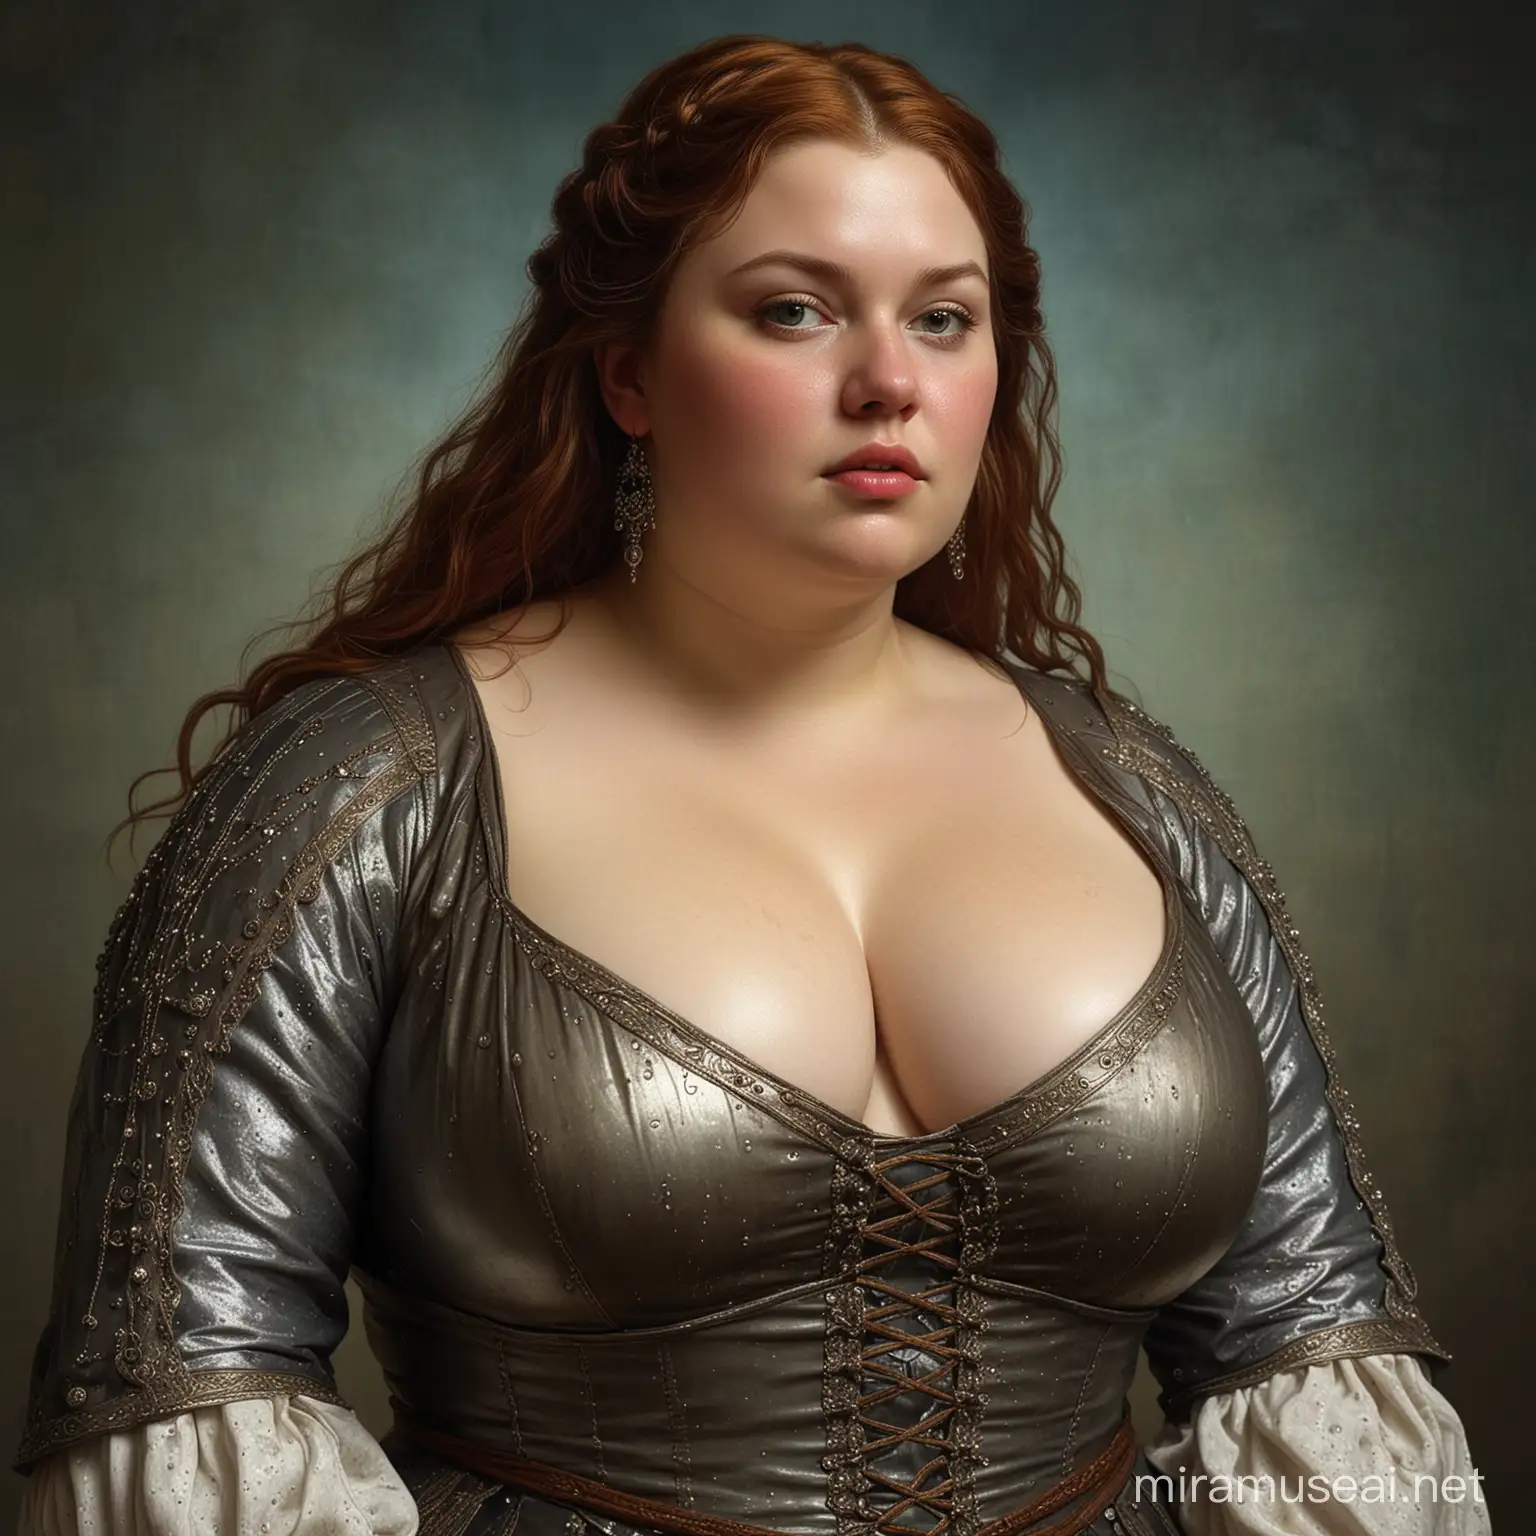 Ultrarealistic Wet Chubby Woman in Tight Medieval Dress Intricately Detailed Portrait in Vibrant Colors